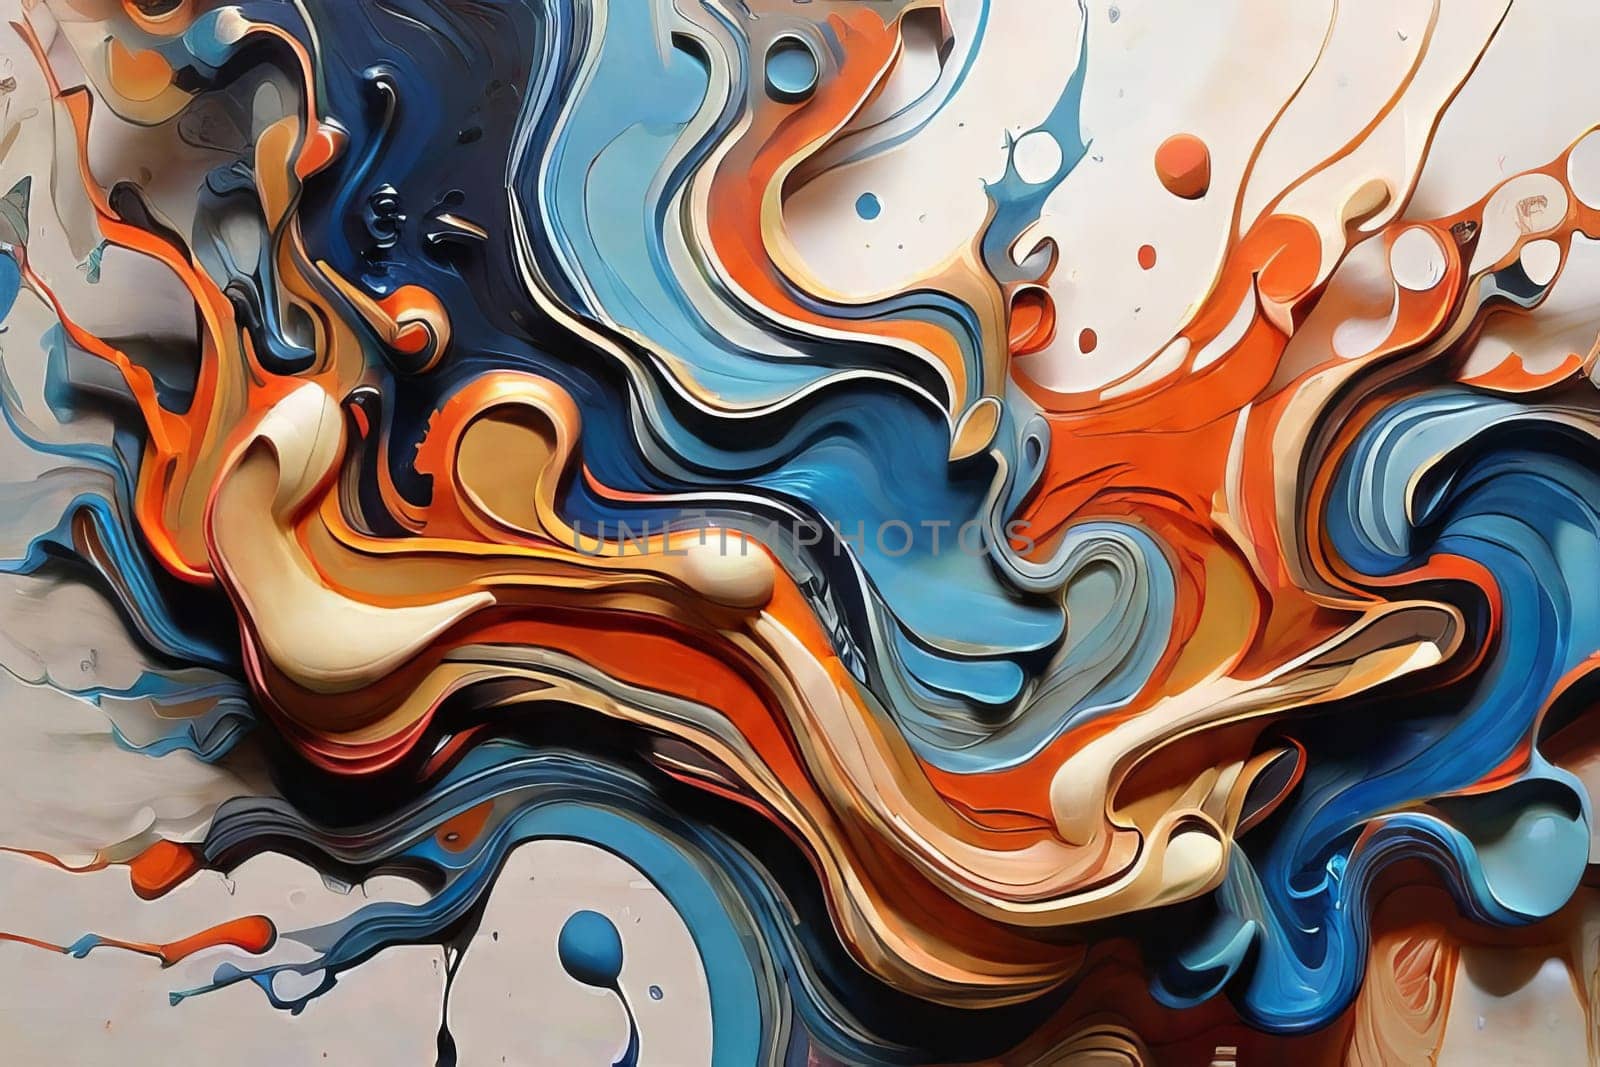 Acrylic illustration in the style of fluid art. An abstract banner